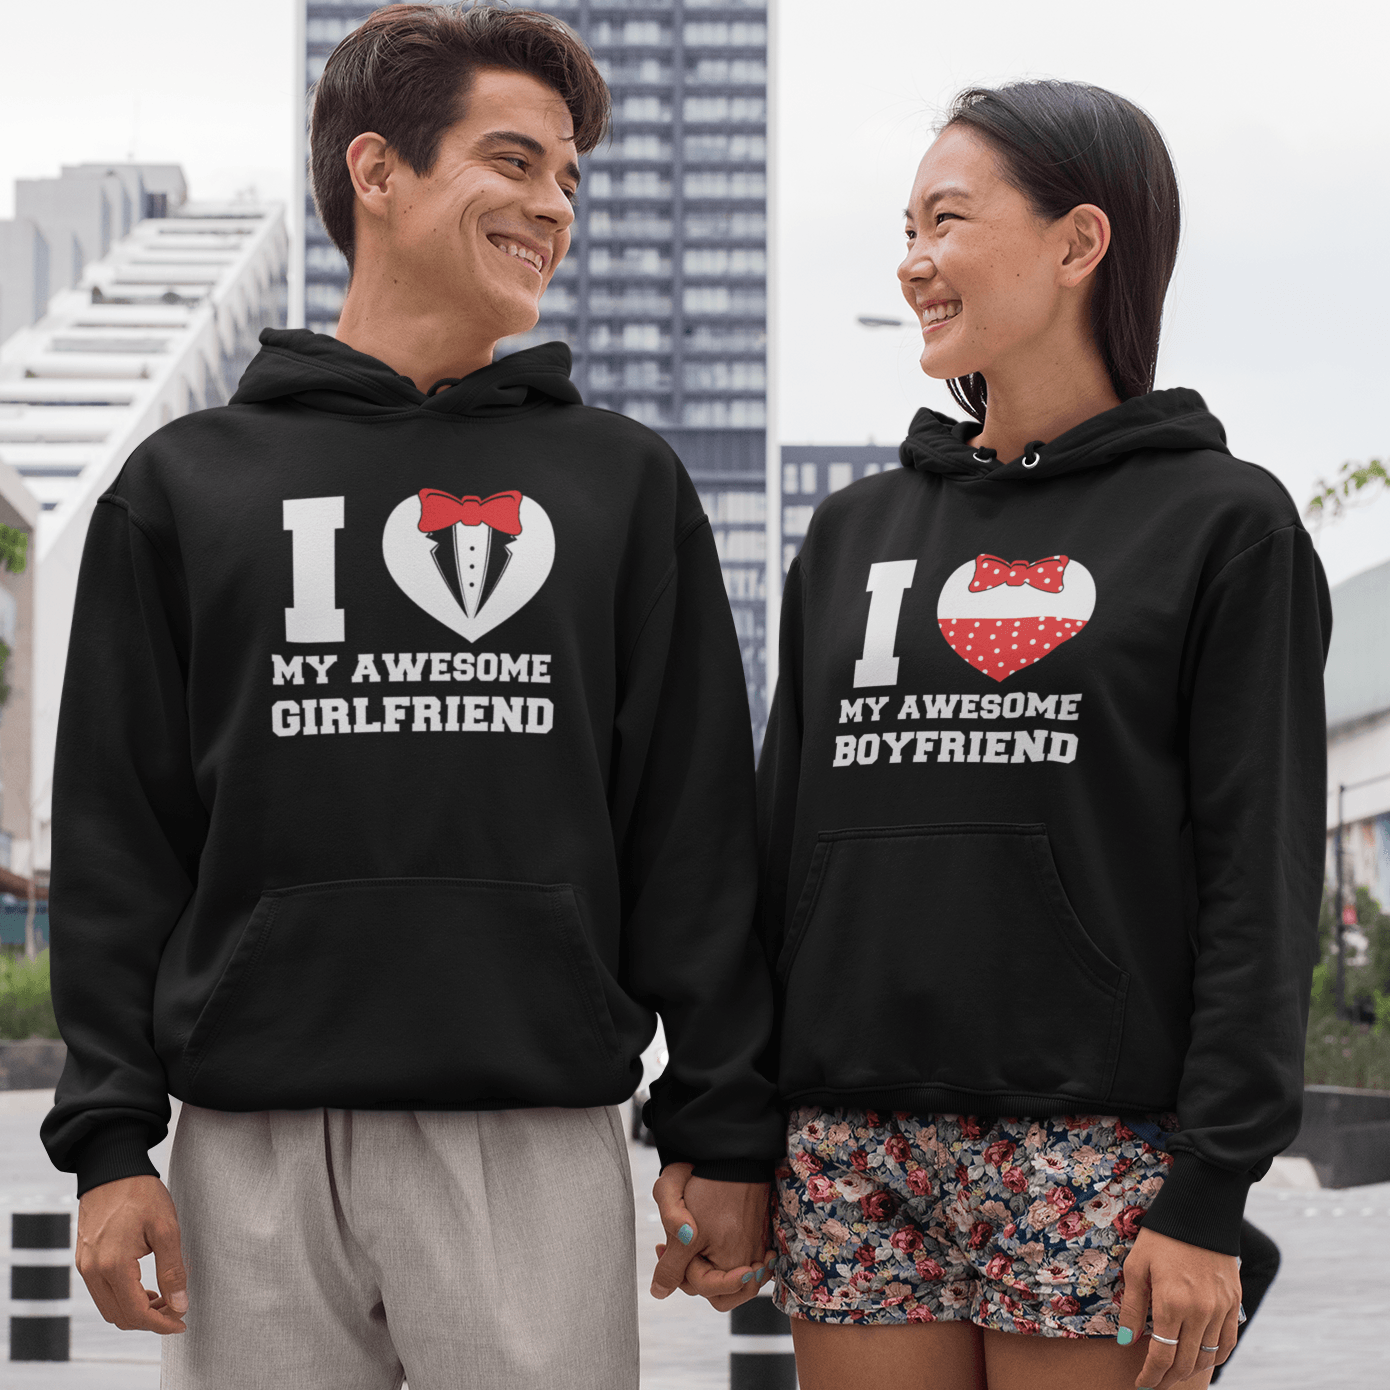 I Love My Awesome Girlfriend & Boyfriend Valentine Matching Set for Couples: Gift for Lovers, Cute Hoodie & T-shirt - 4Lovebirds